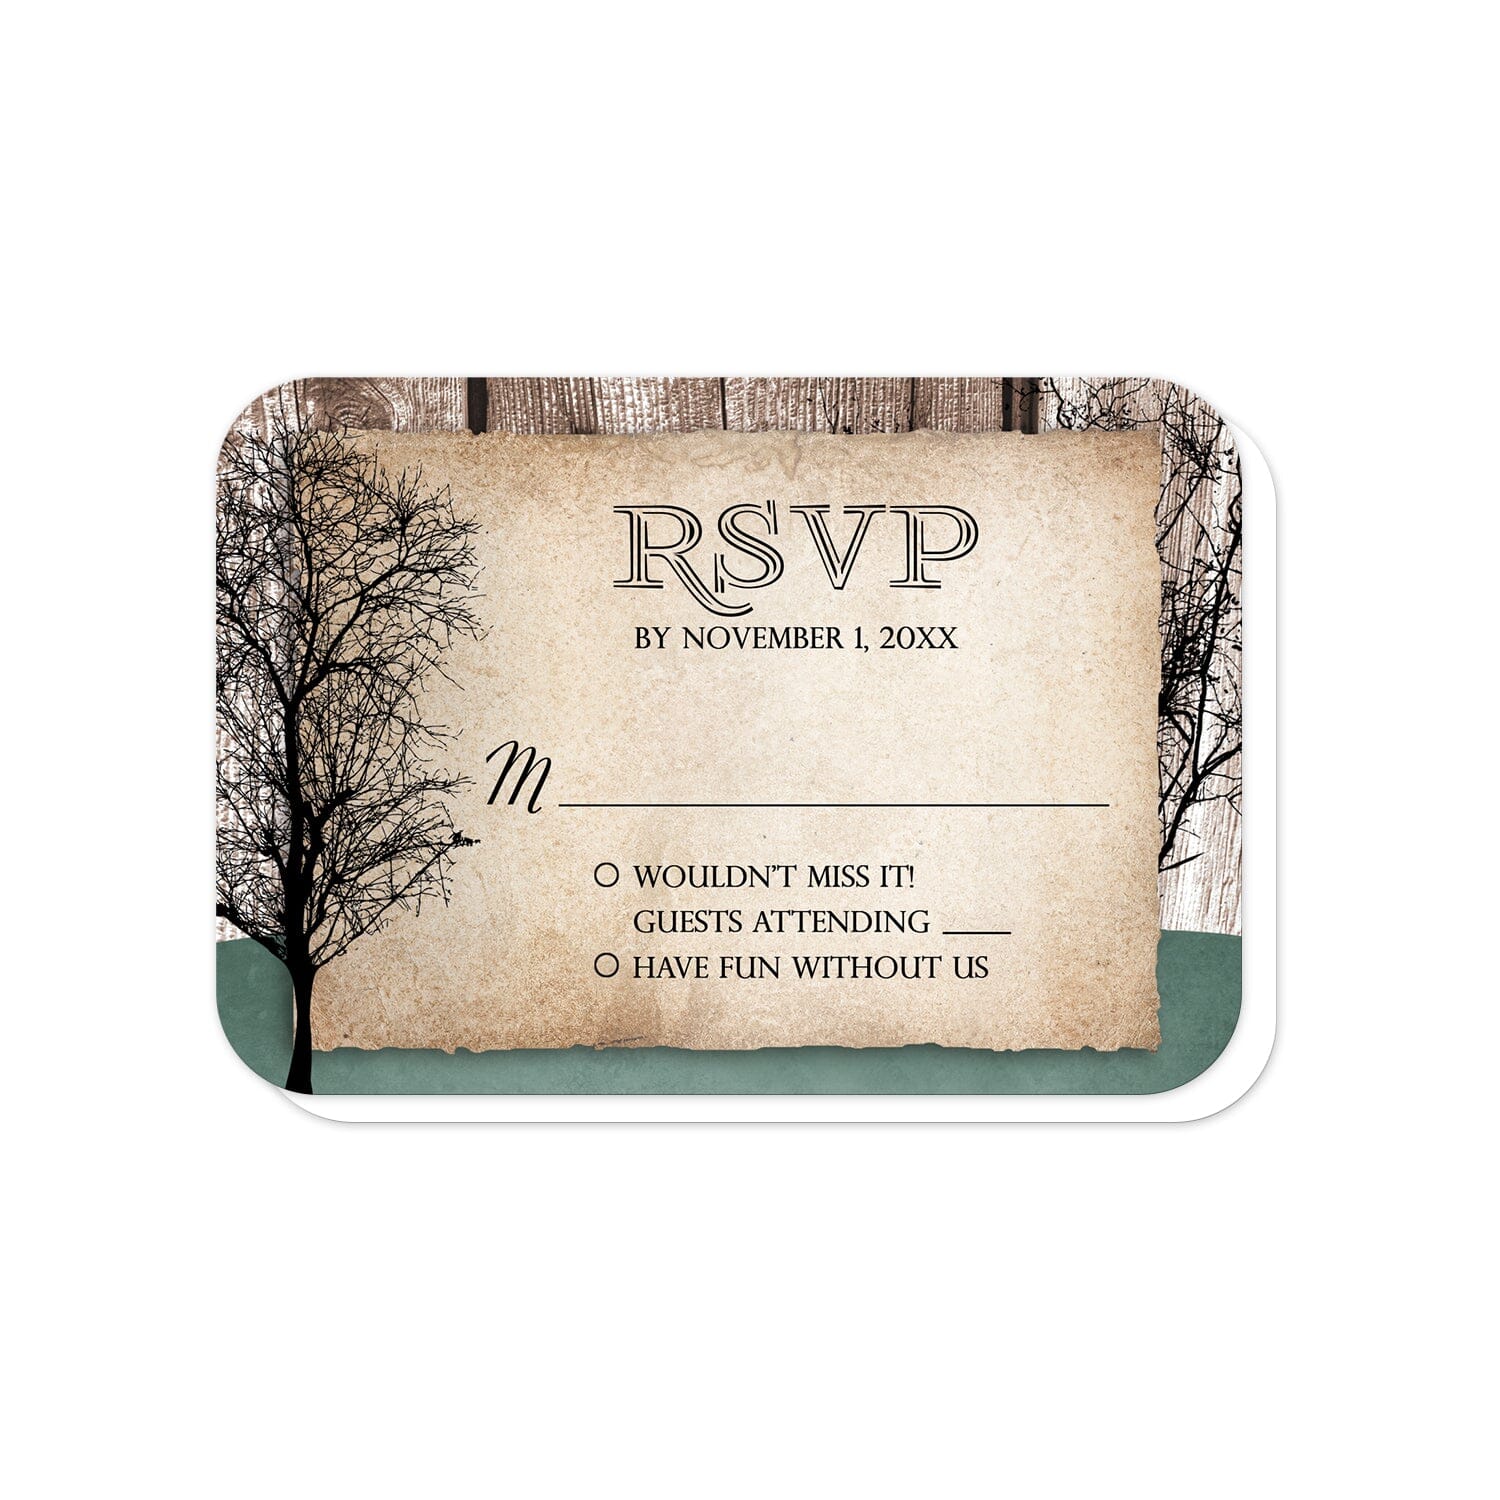 Rustic Woodsy Deer RSVP cards (with rounded corners) at Artistically Invited. Rustic woodsy deer vow renewal invitations designed with silhouettes of a buck deer with antlers, a doe, and winter trees over a wood brown background and a faded hunter green design along the bottom. Your personalized RSVP date details are custom printed in black over a tattered rustic paper illustration between the deer.